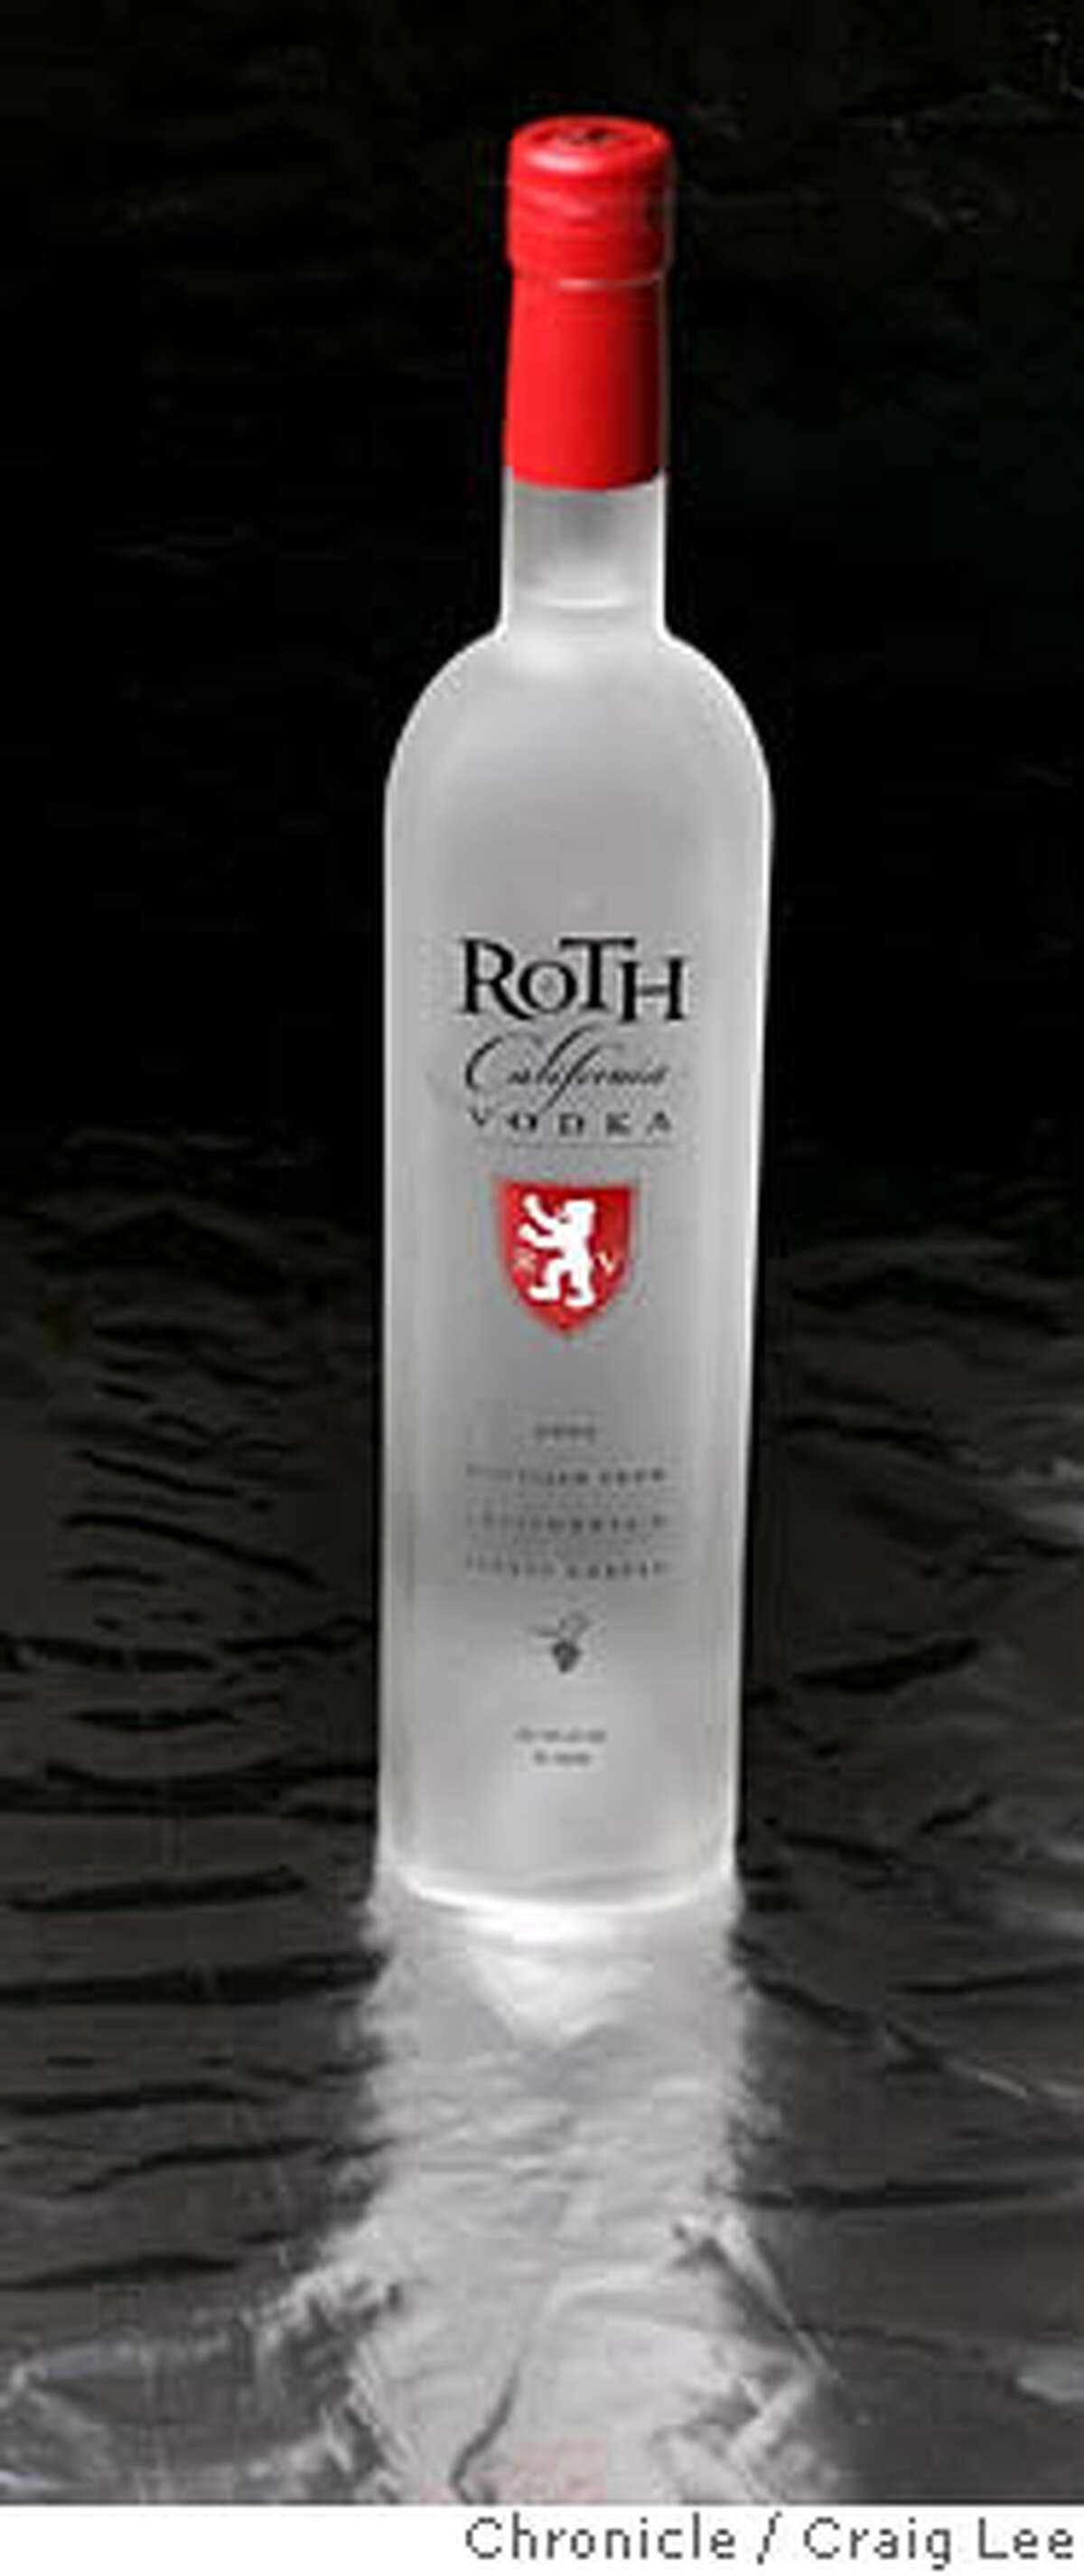 ROTH16_009_cl.JPG Roth California vodka Craig Lee / The Chronicle MANDATORY CREDIT FOR PHOTOG AND SF CHRONICLE/ -MAGS OUT